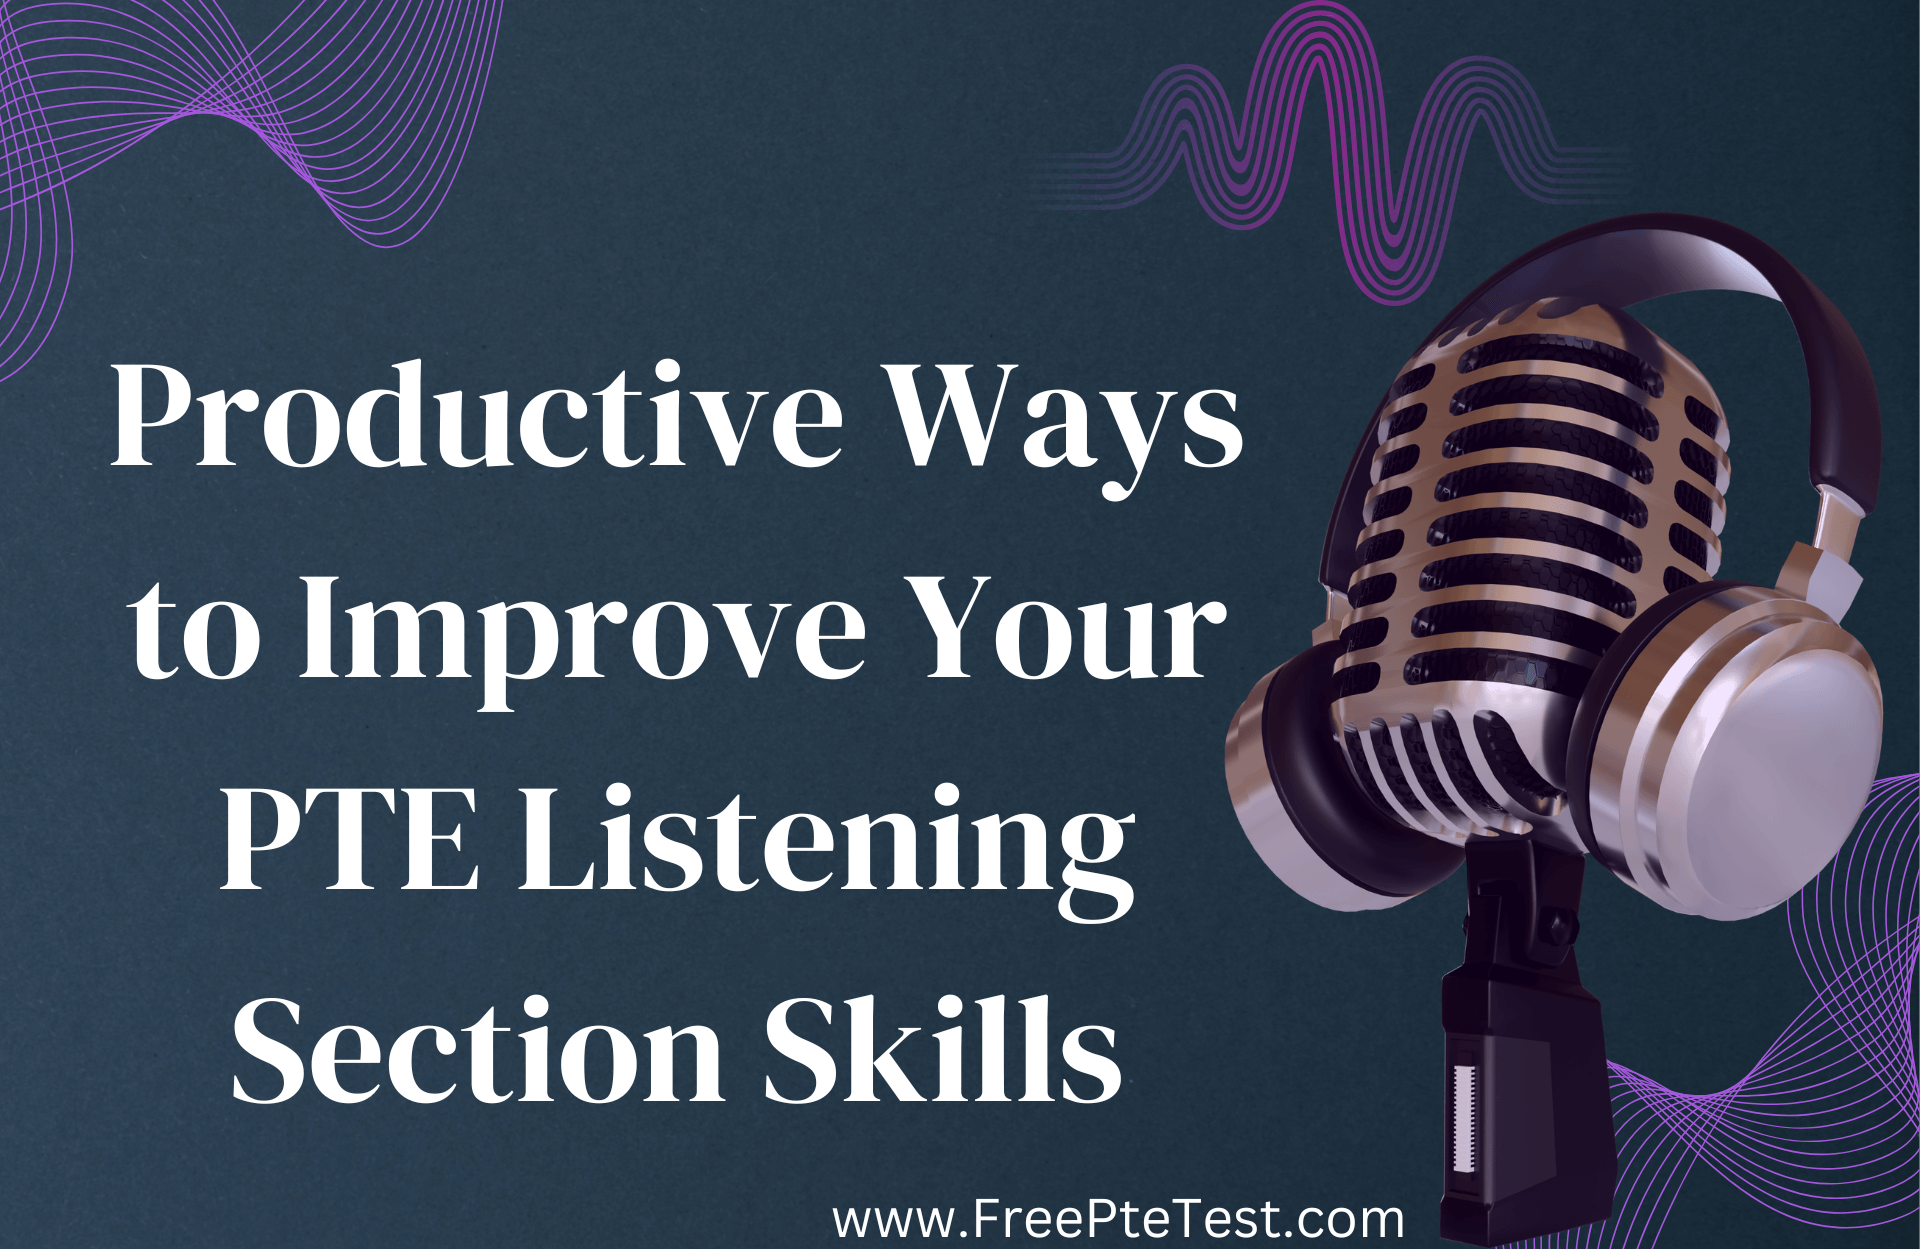 You are currently viewing Productive Ways to Improve Your PTE Listening Section Skills